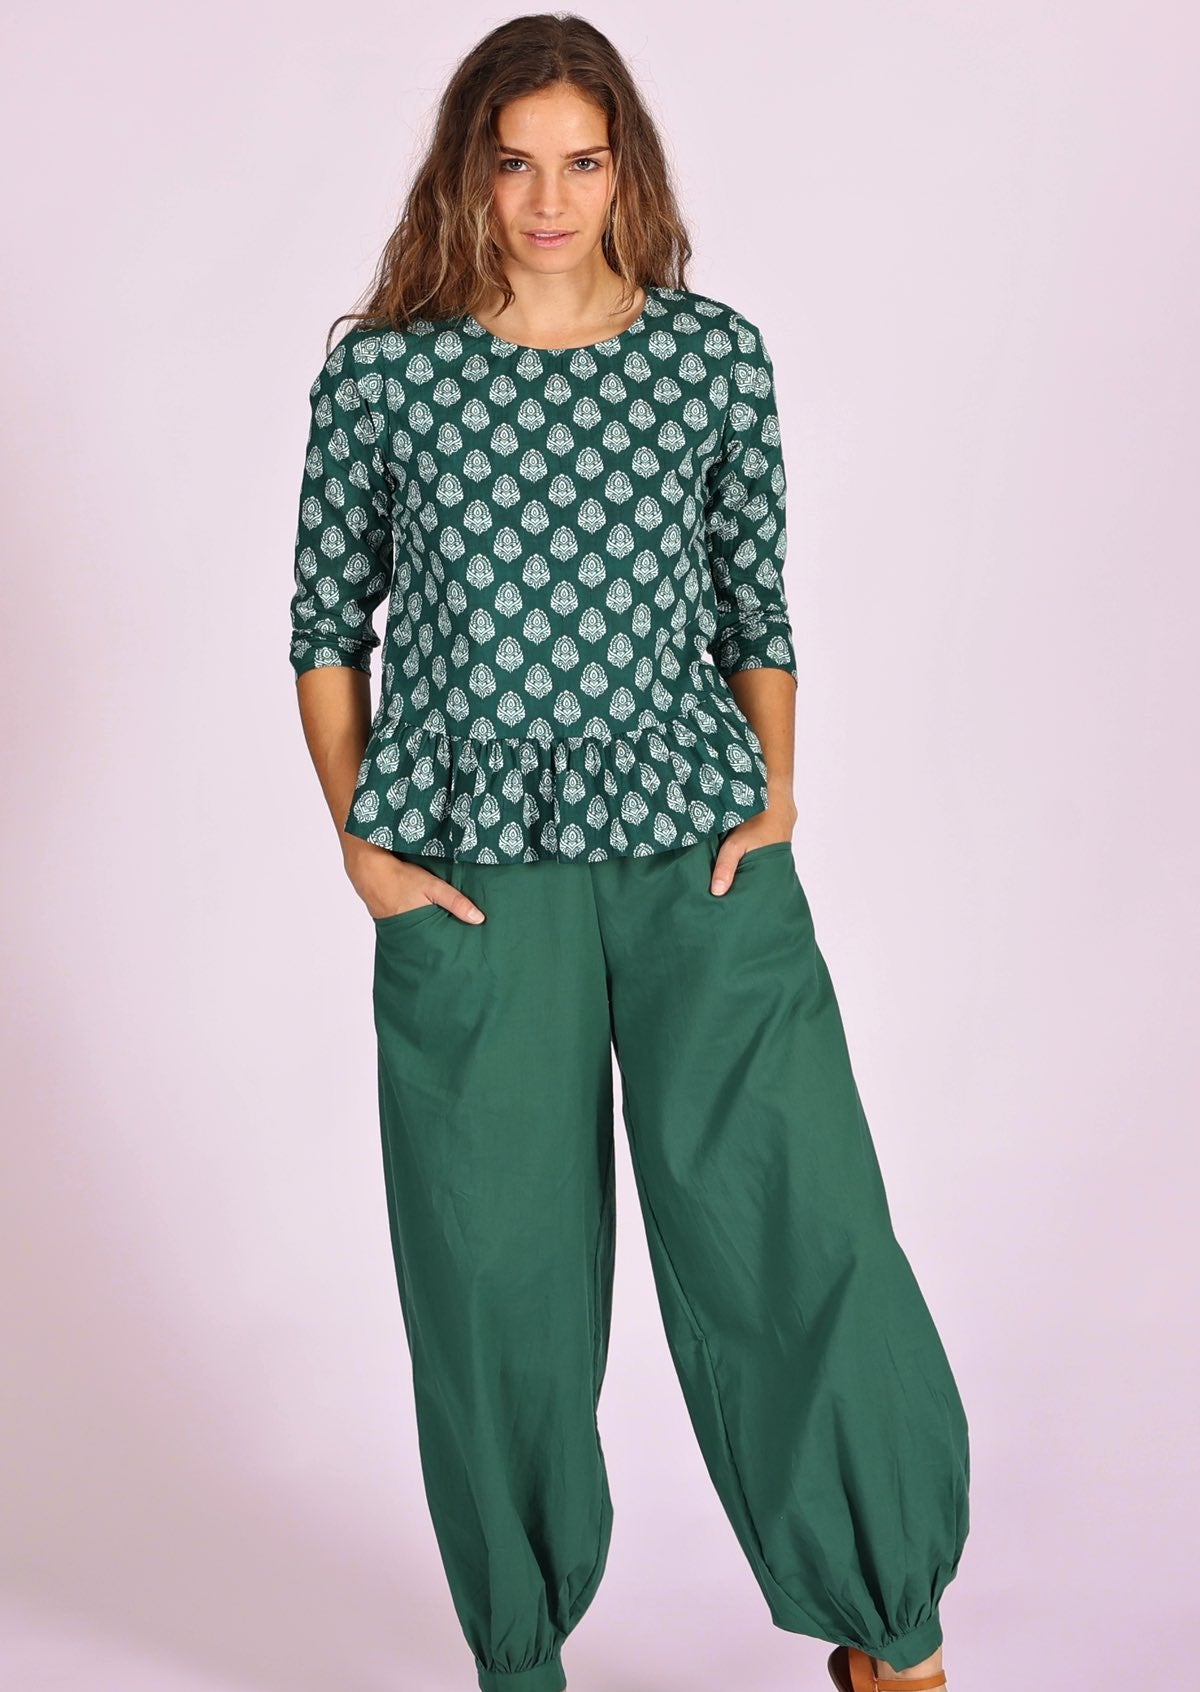 Comfort and style in this peplum top with 3/4 sleeves